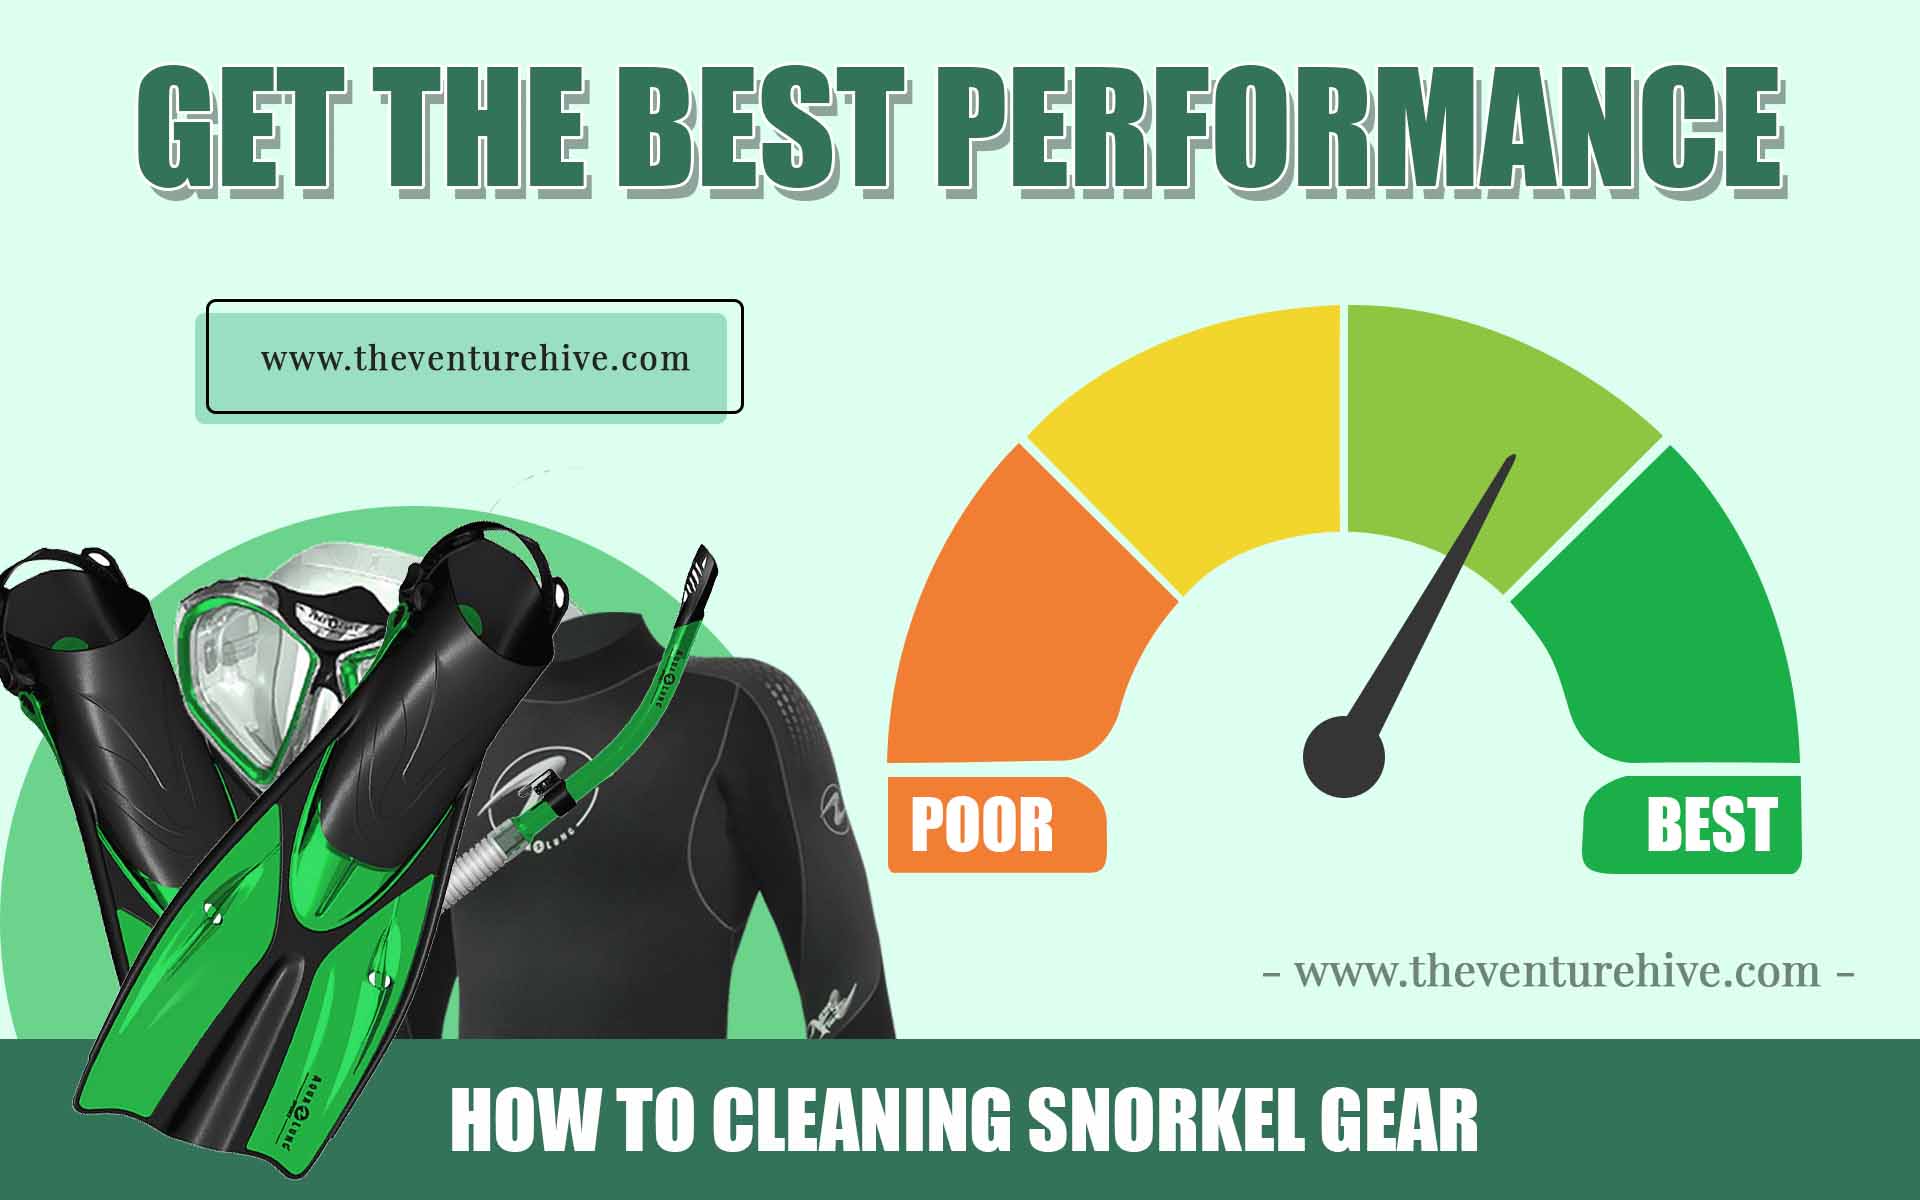 Cleaning Snorkel Gear Expert Tips for Cleaning and Storing Your Snorkel Gear Properly 3